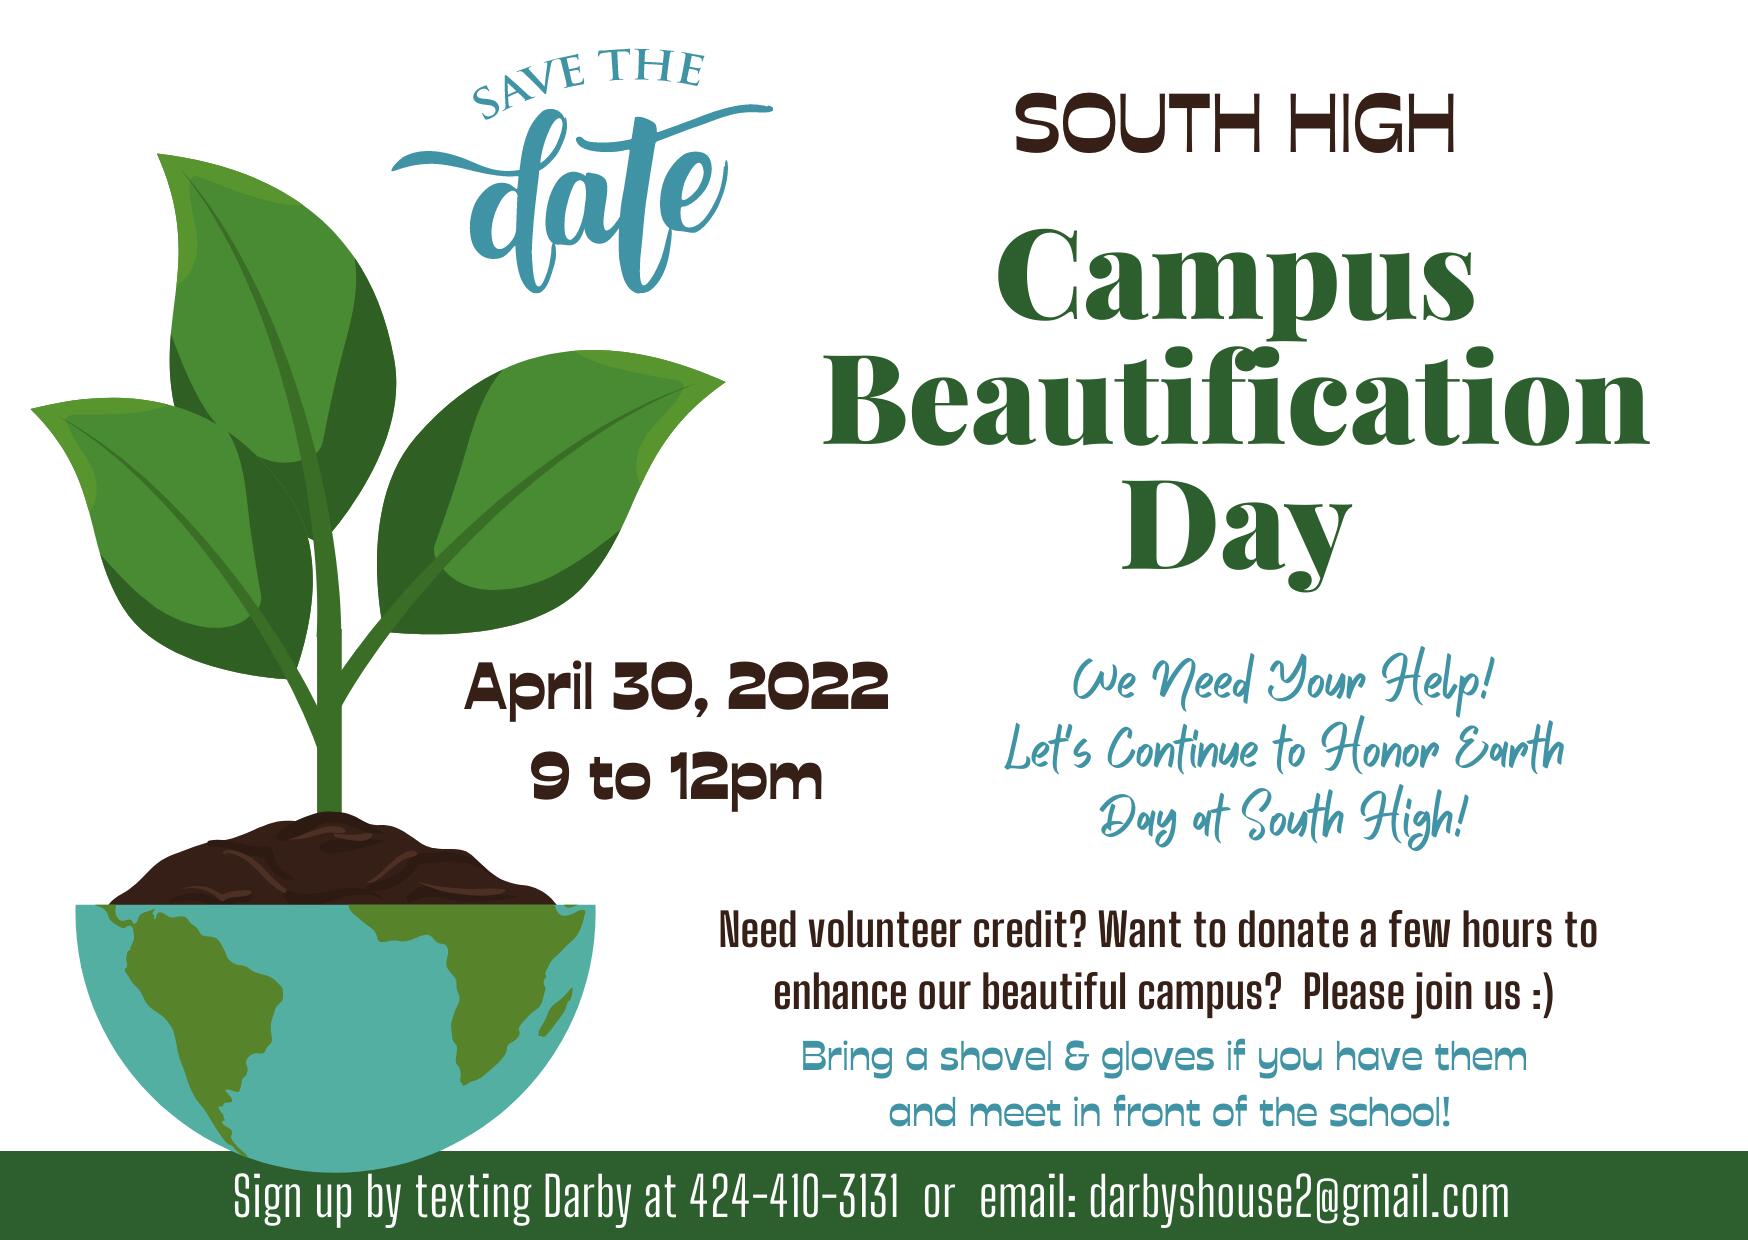 South High Campus Beautification Day